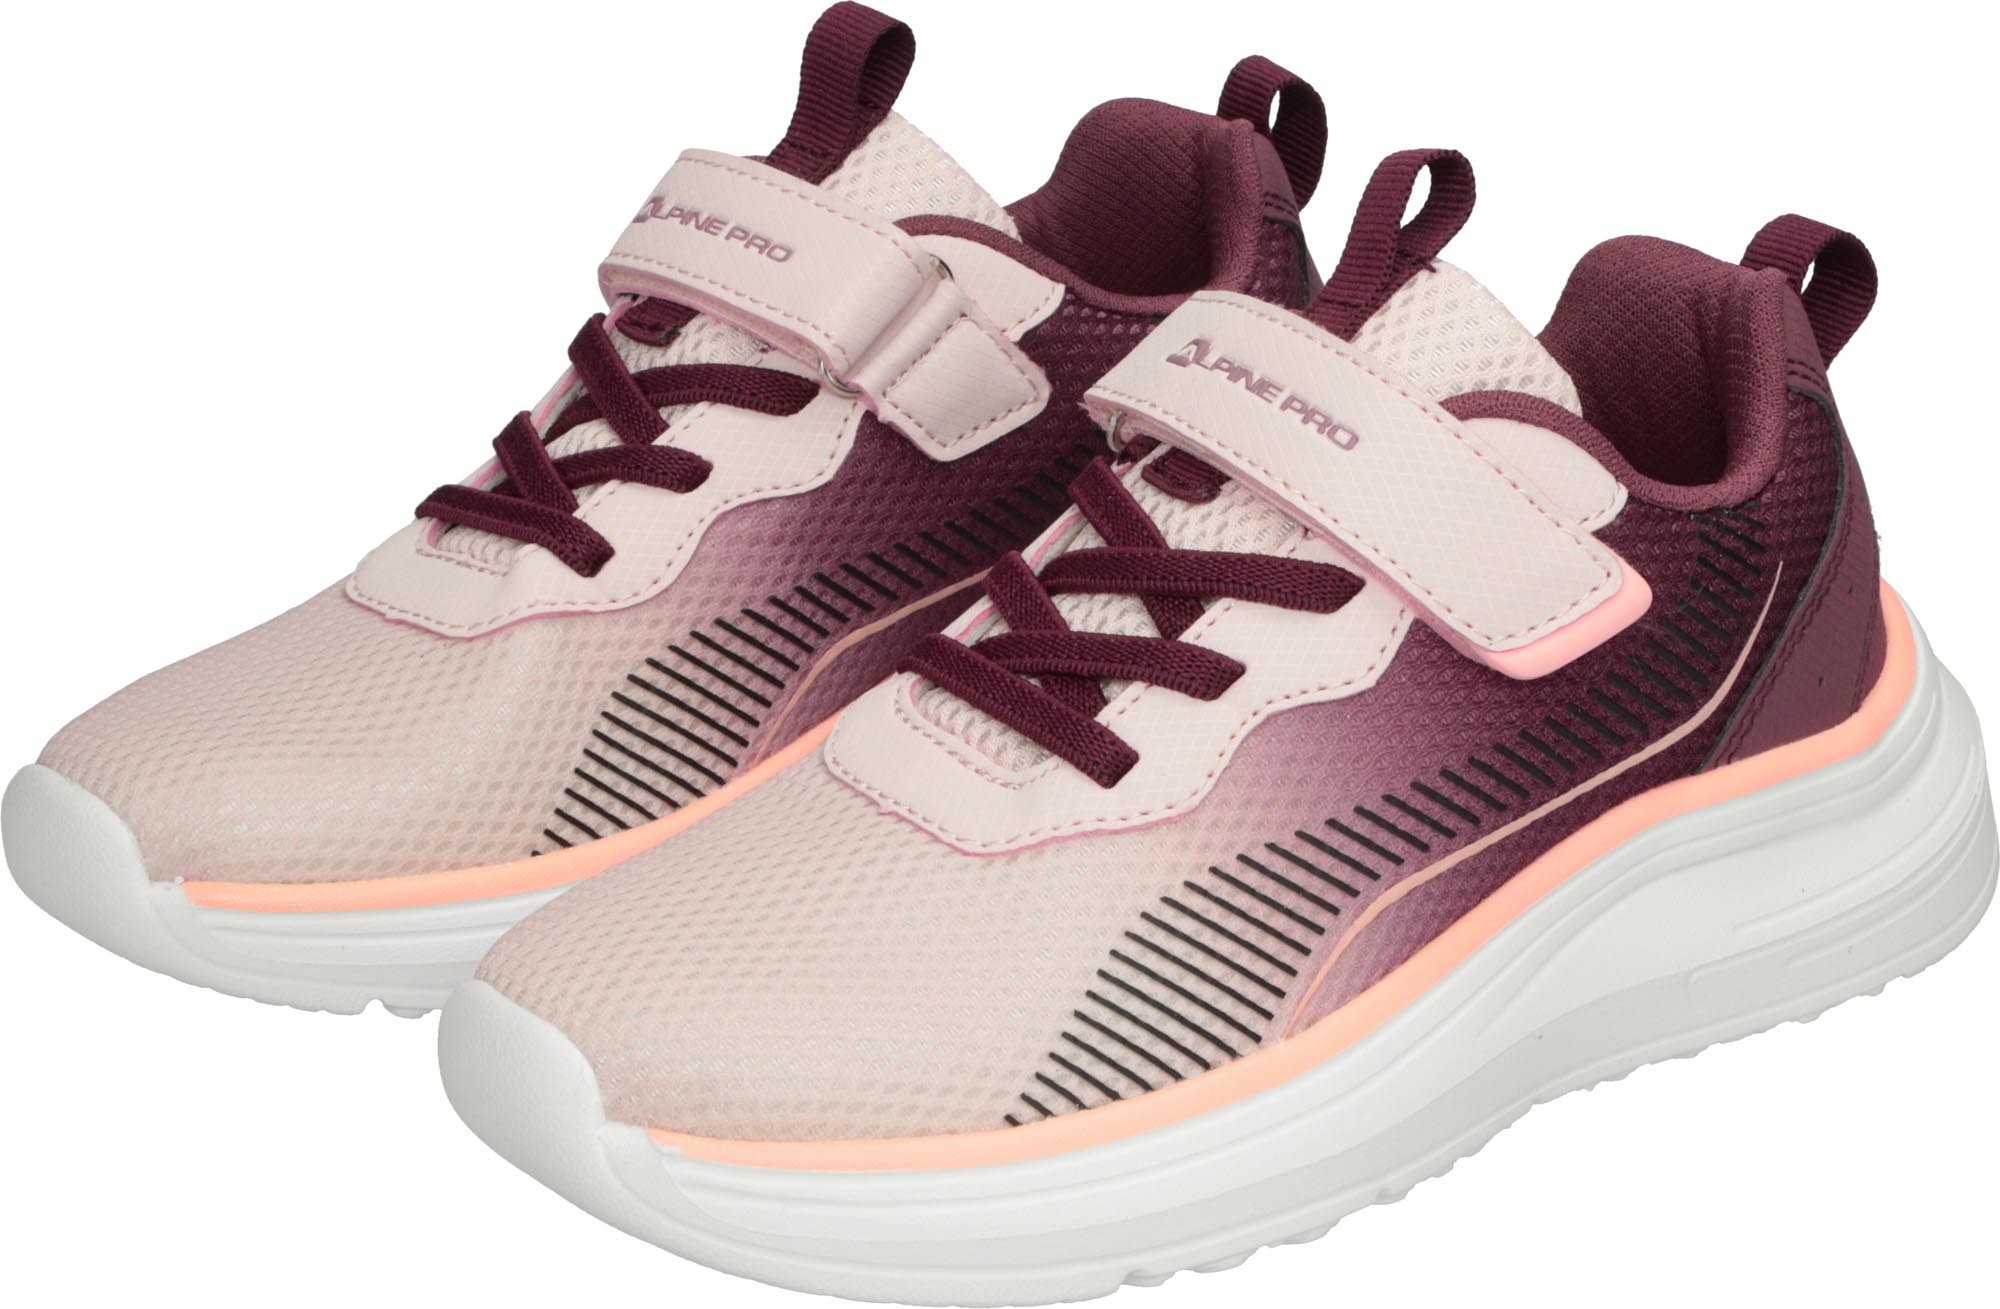 Girls' sports shoes